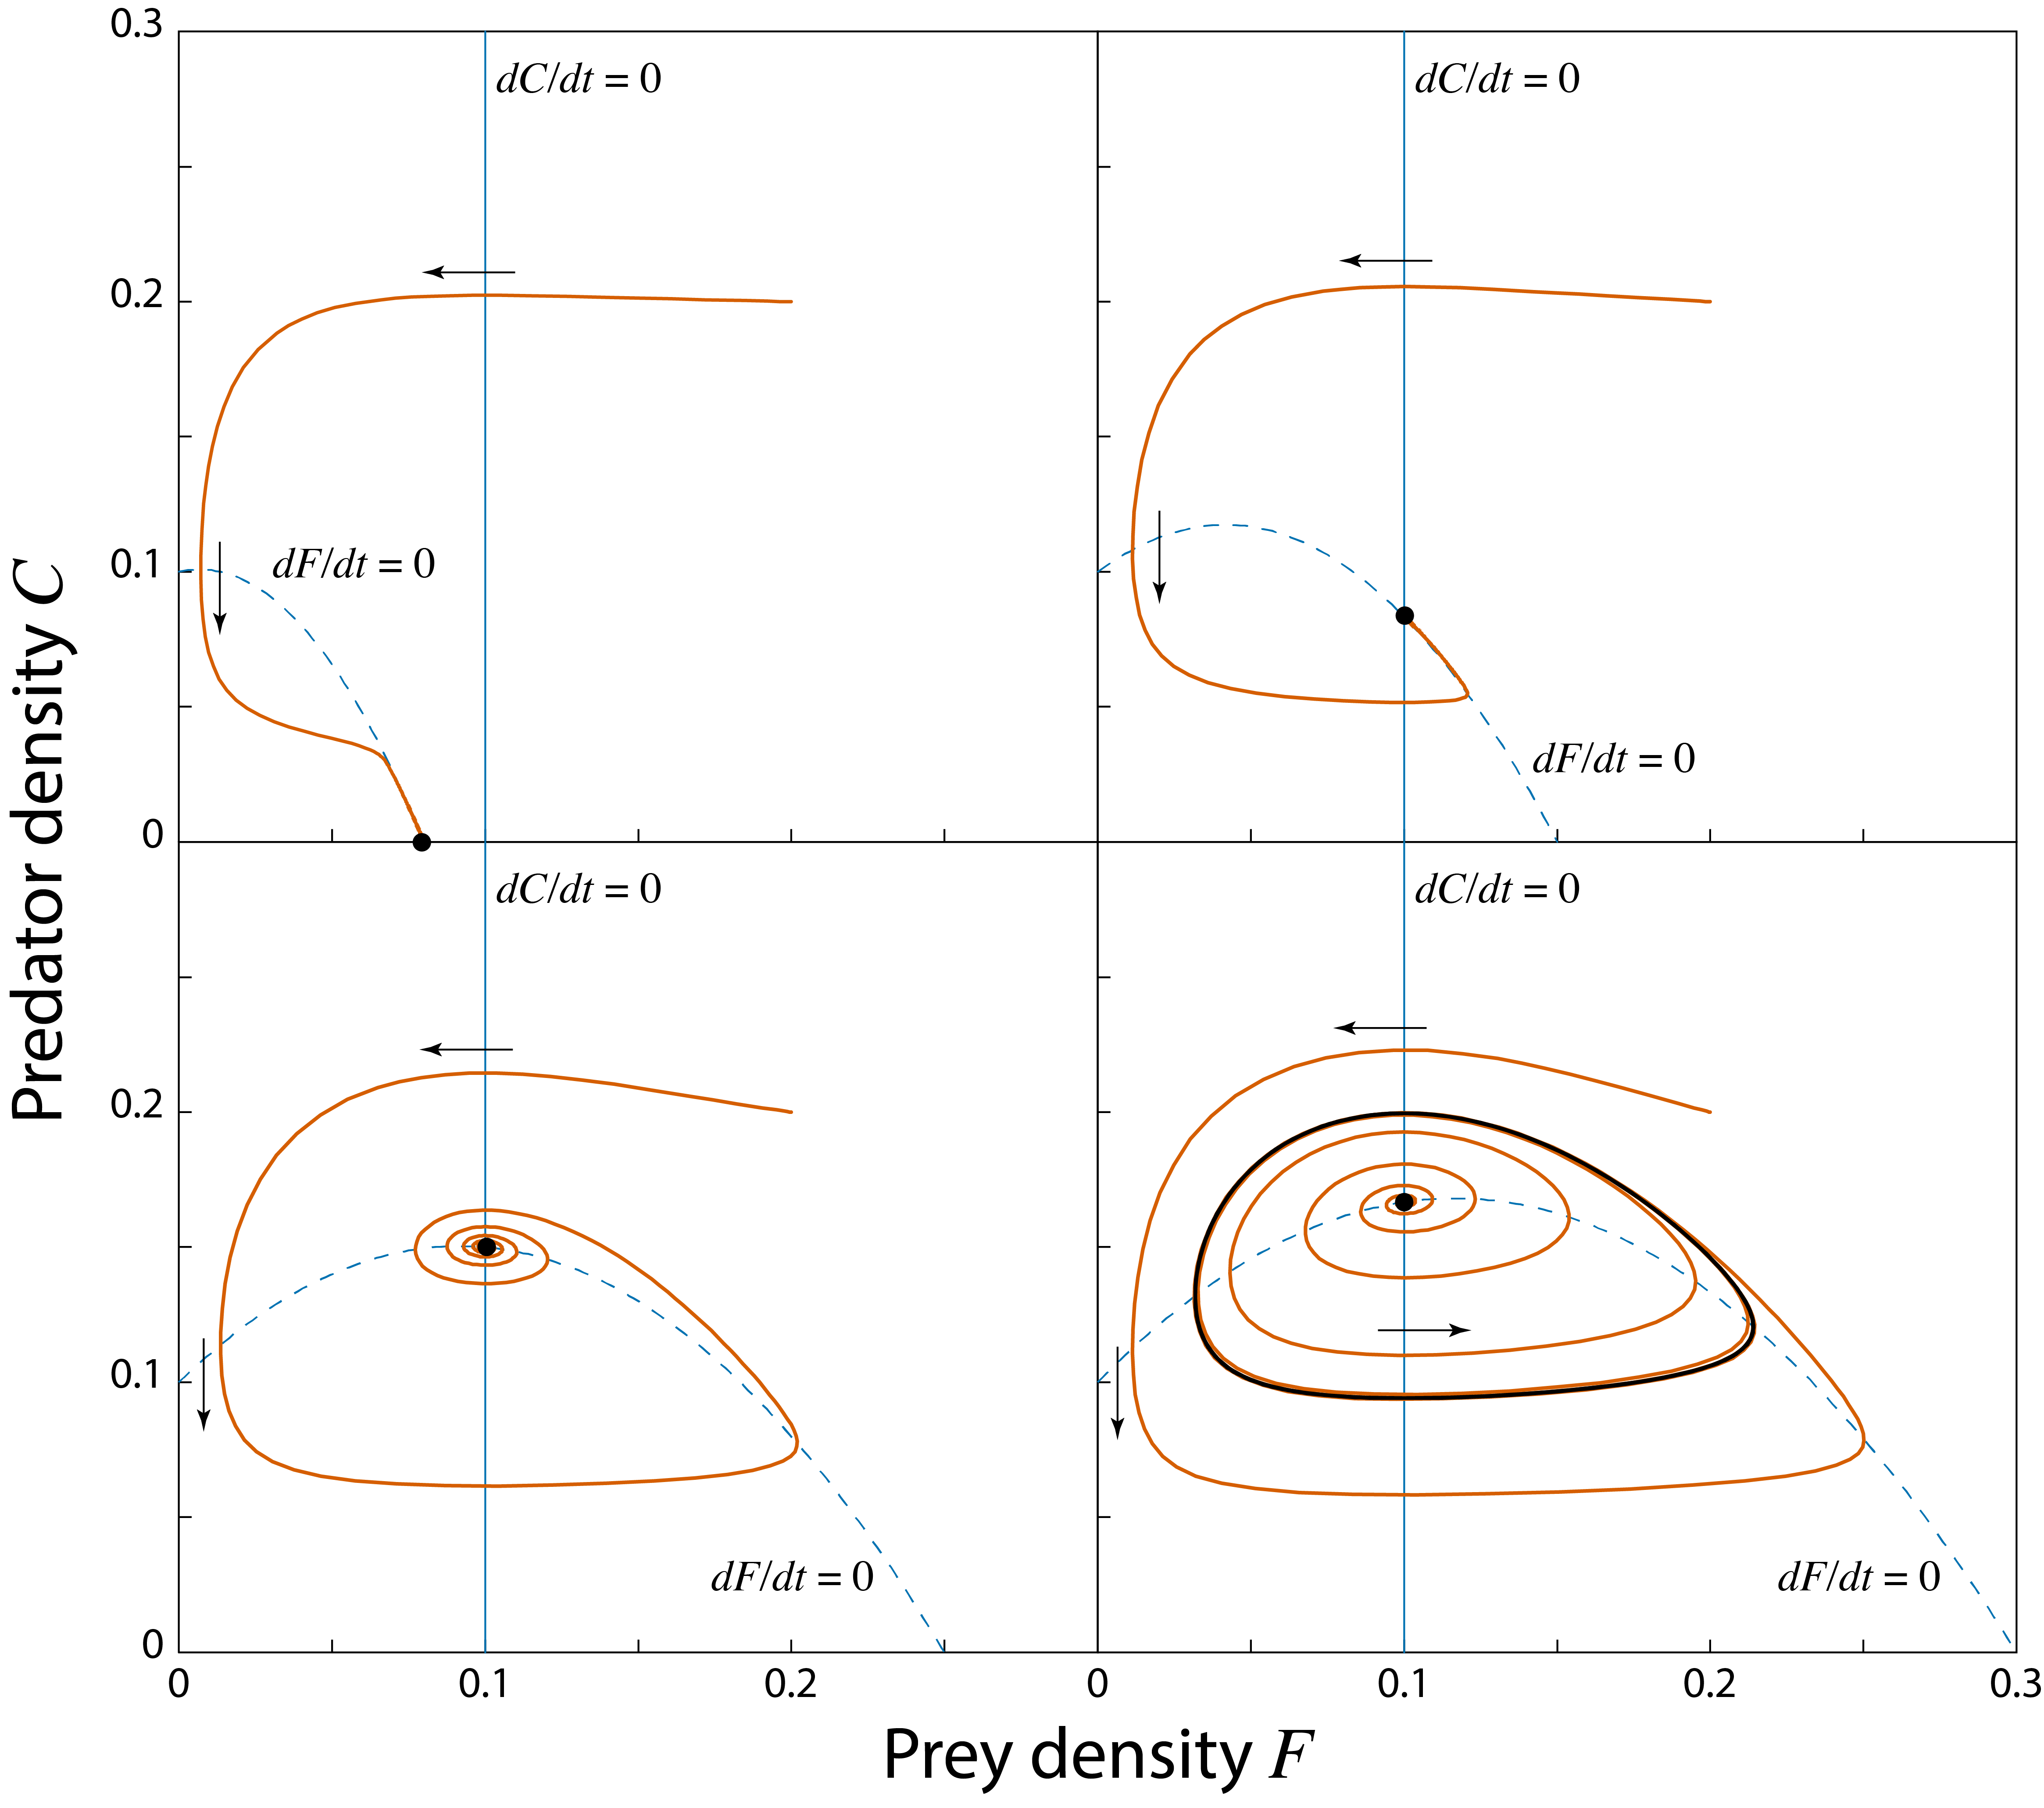 Solution curves in the phase plane of the Rosenzweig-MacArthur predator-prey model. Two isoclines where $dF/dt=0$ (vertical, thin solid line) and $dC/dt=0$ (hump-shaped, thin dashed line) are drawn (the isoclines coinciding with the $x$- and $y$-axis have been omitted).  The isoclines intersect in the internal steady state.  *Top-left panel*: $K=0.08$; the internal steady state is biologically irrelevant, the prey-only equilibrium is a stable equilibrium.  *Top-right panel*: $K=0.15$; the internal steady state is a stable equilibrium. *Bottom-left panel*: $K=0.25$; the internal steady state is a stable spiral. *Bottom-right panel*: $K=0.3$; the internal steady state is an unstable spiral. In this latter figure two trajectories are drawn: one starting close to the unstable steady state, the other starting far away from it. Both approach the unique limit cycle (thick solid line).  Other parameter values: $r=0.5$, $a=5.0$, $h=3.0$, $\epsilon=0.5$ and $\mu=0.1$.